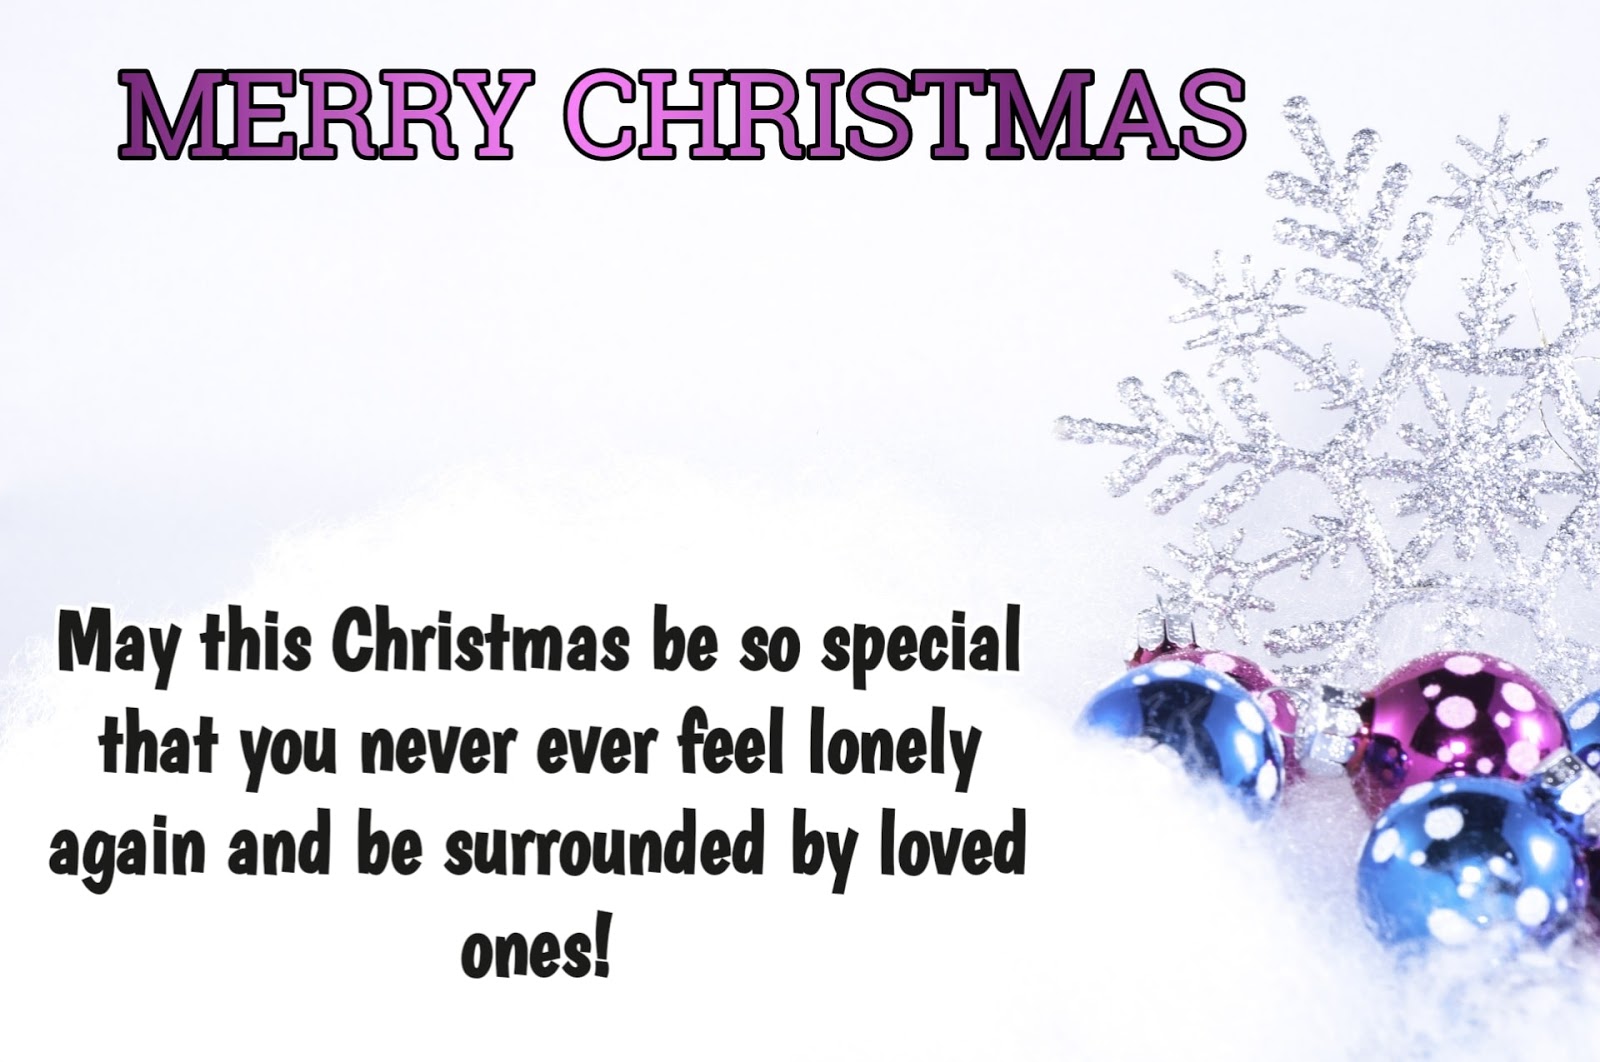 merry Christmas images free